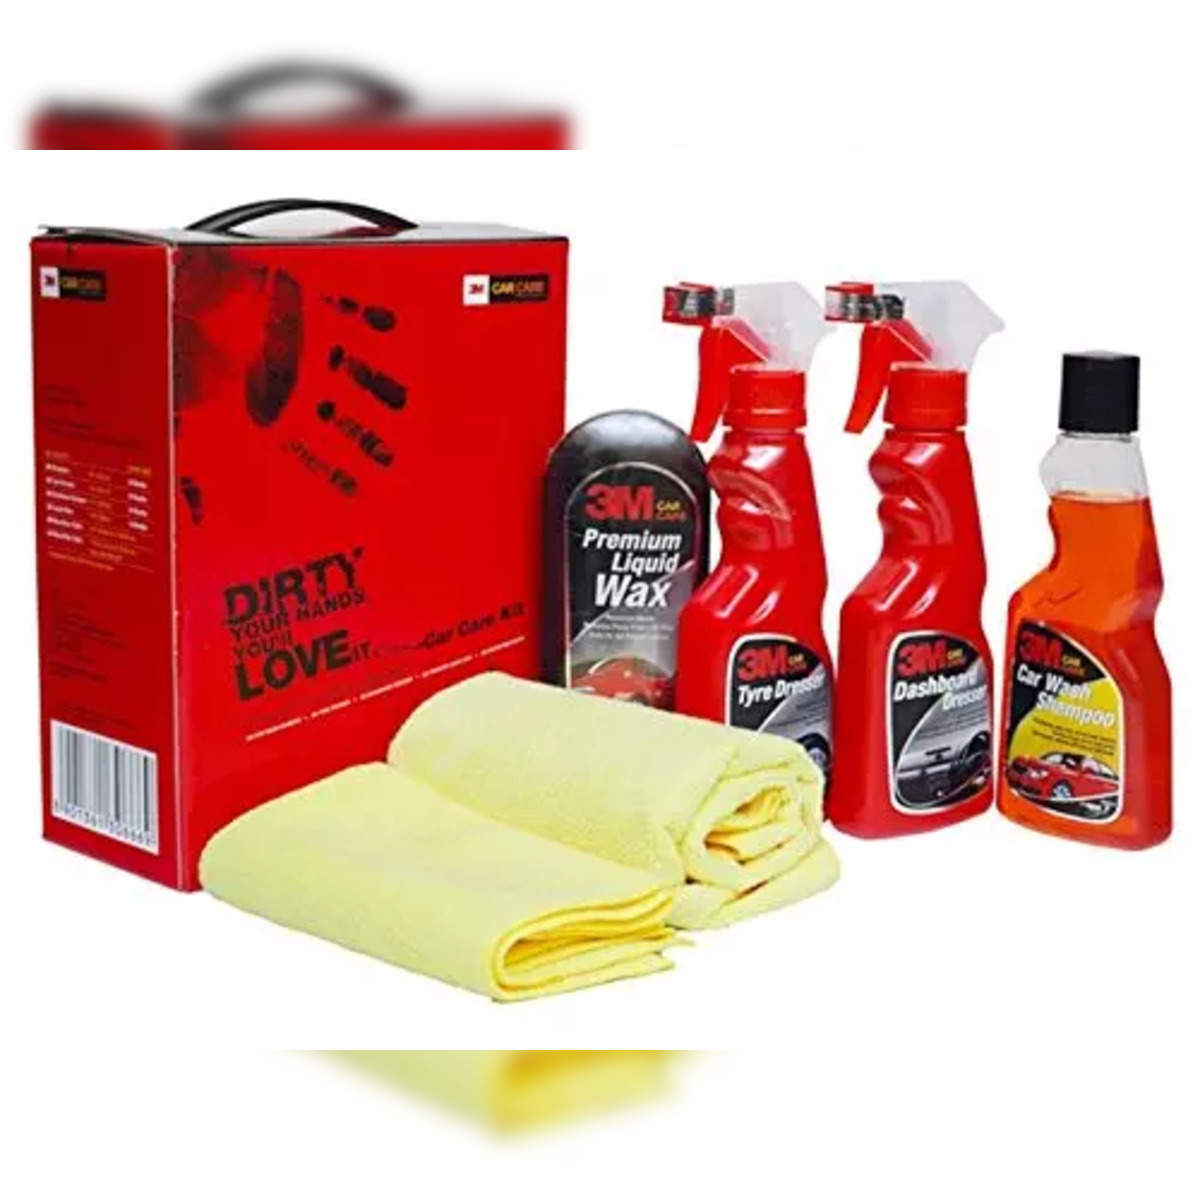 Car care kit: 5 Best Car Care Kits in India for Car Care Kit for a